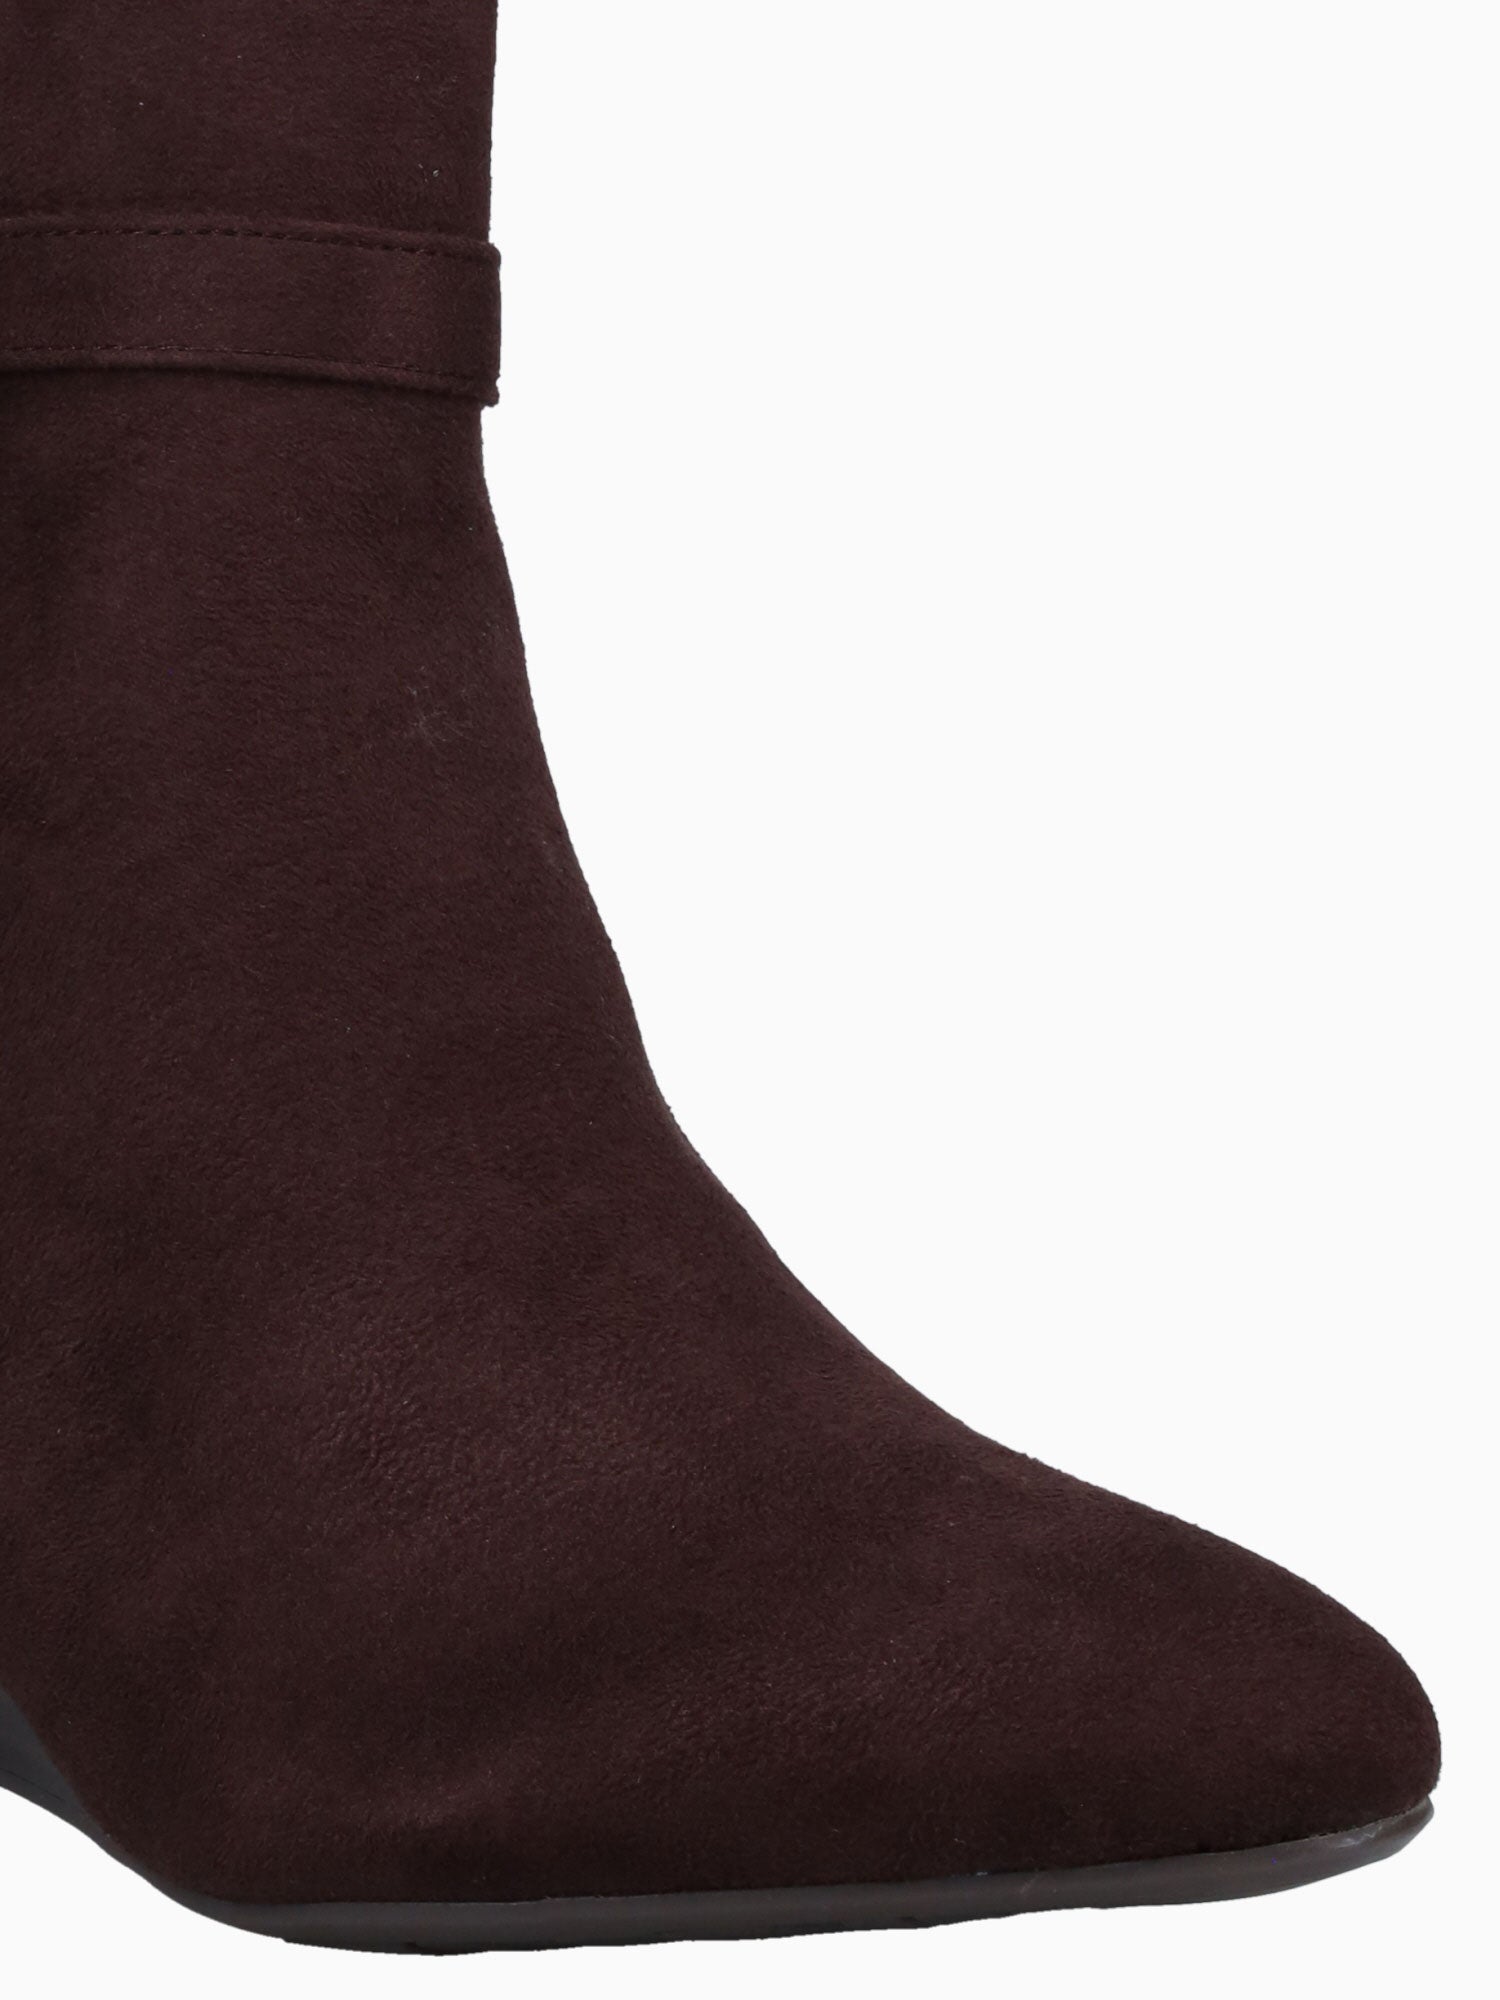 Gio Boot Chocolate Suede Brown / 5 / M